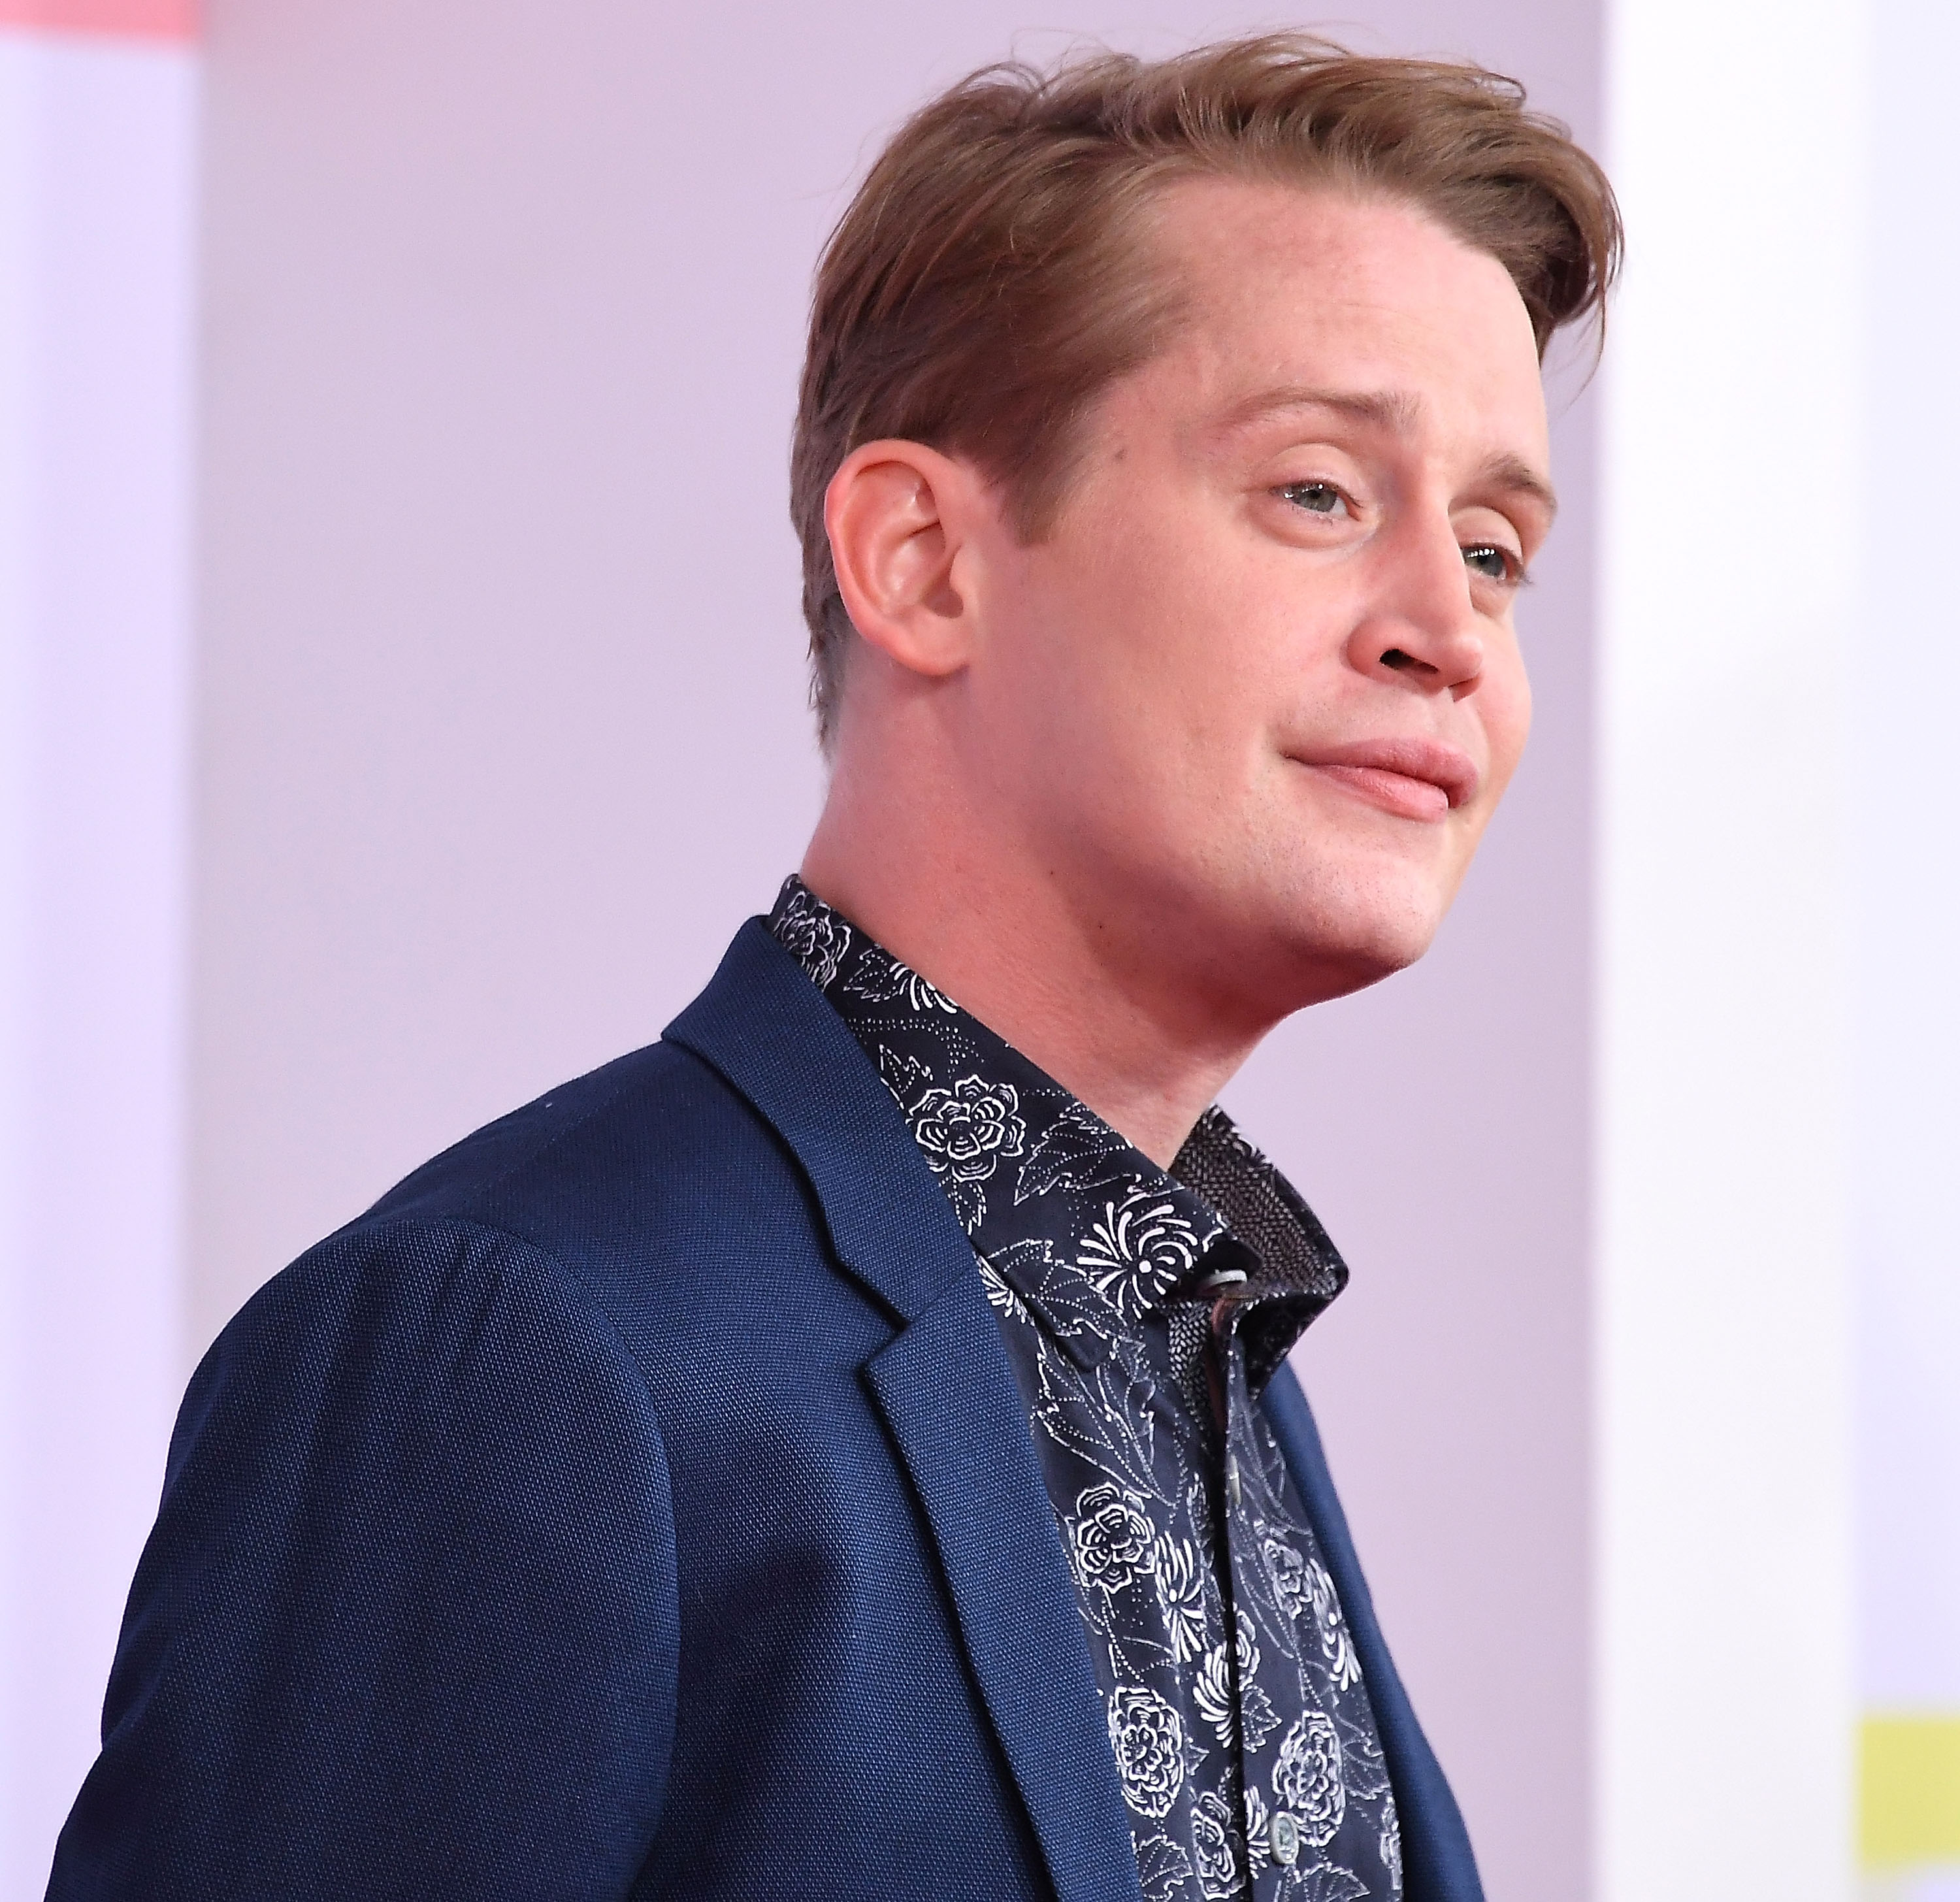 Macaulay Culkin in Los Angeles 2018. | Source: Getty Images